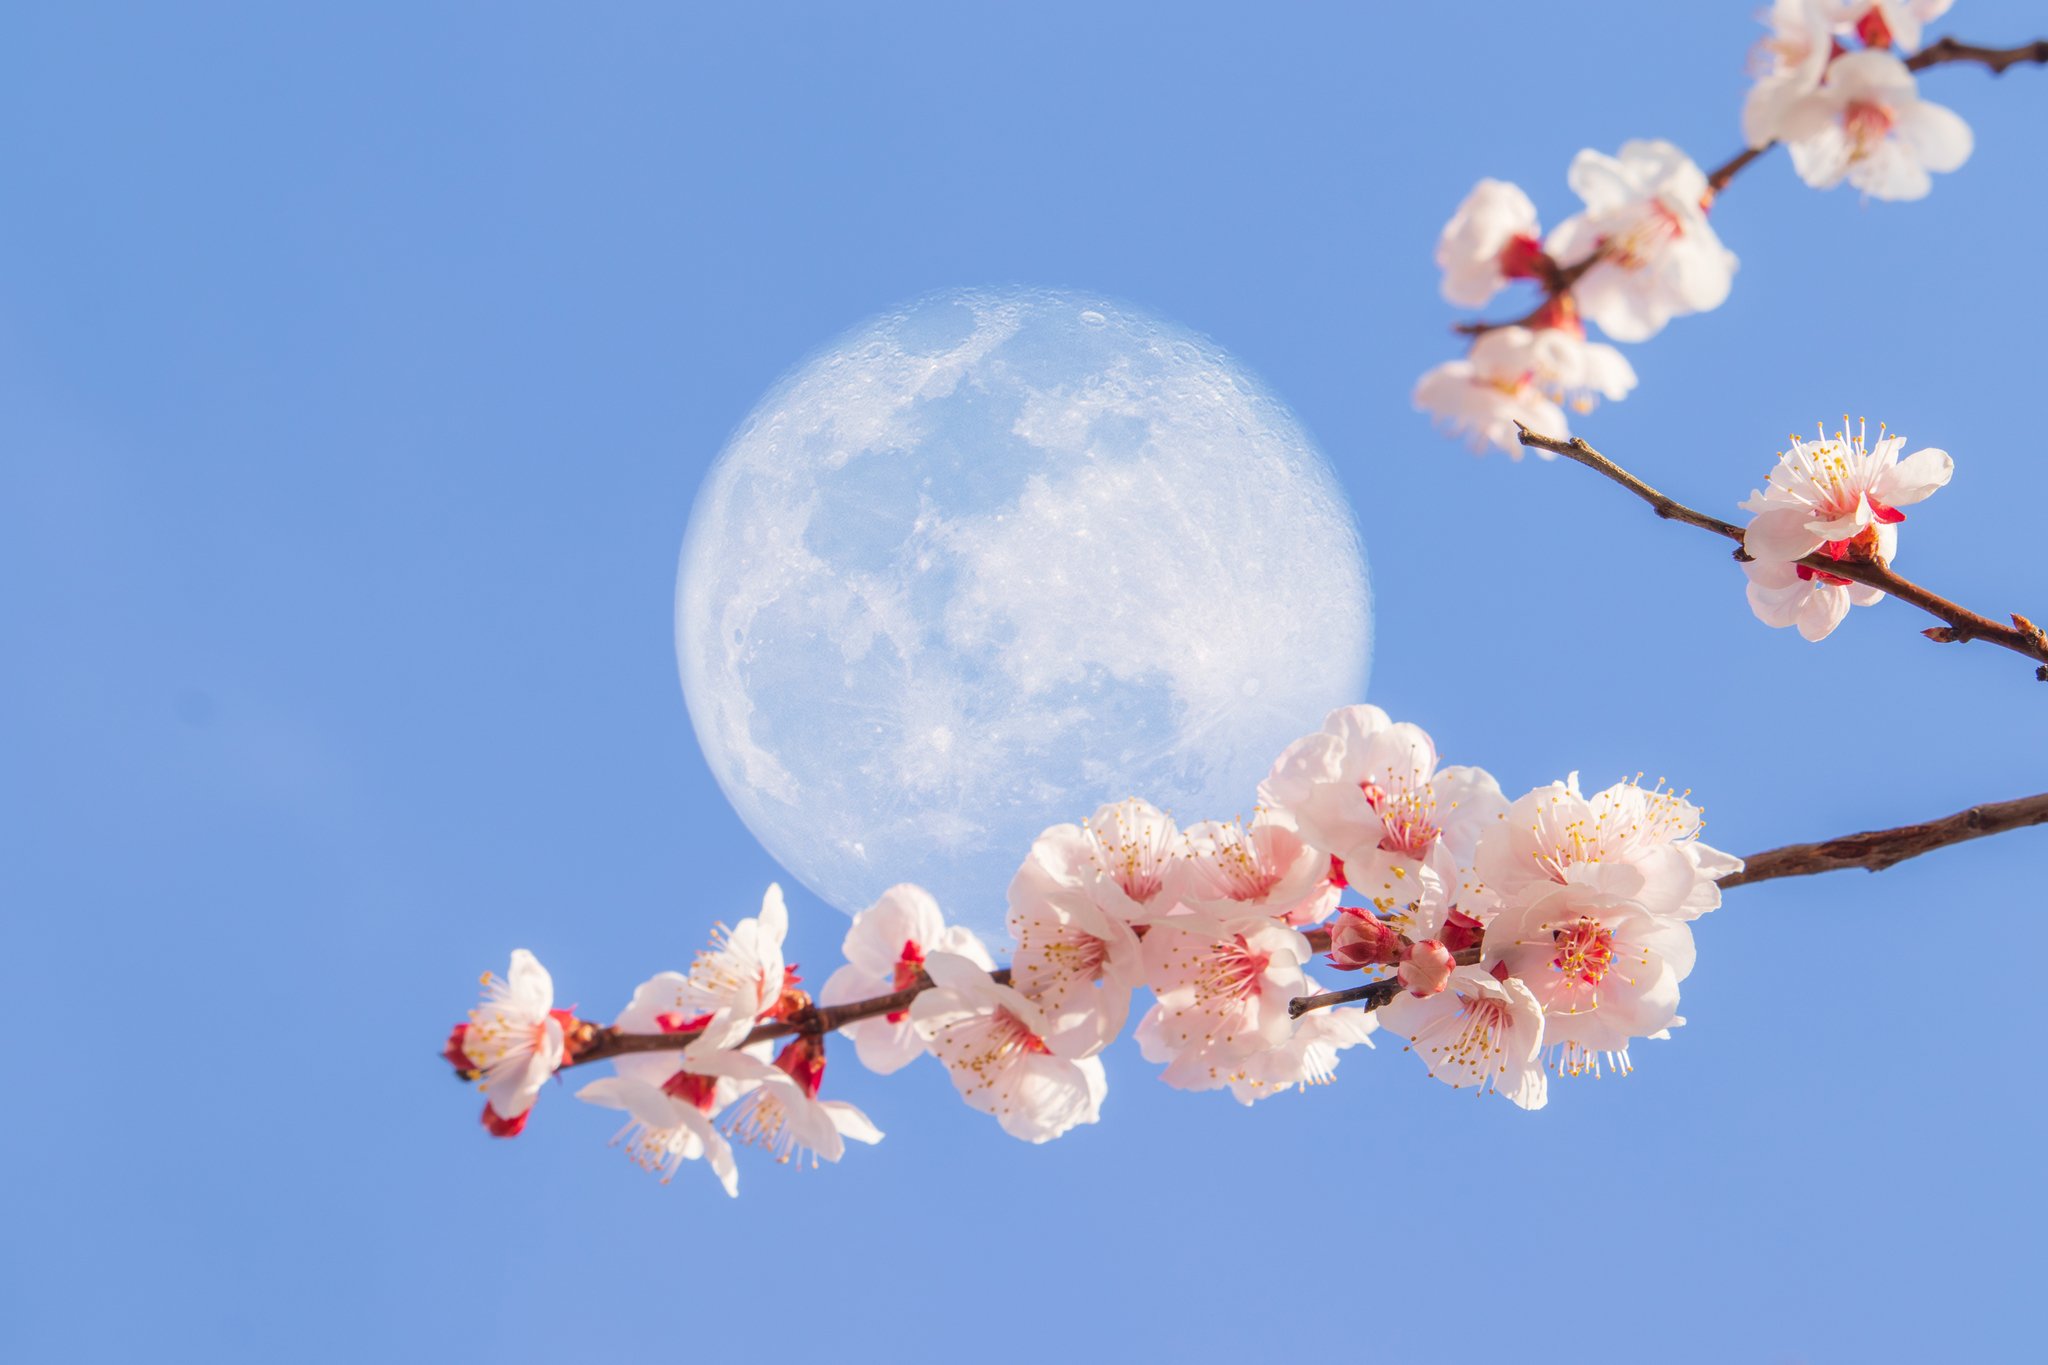 Super Moon With Flower